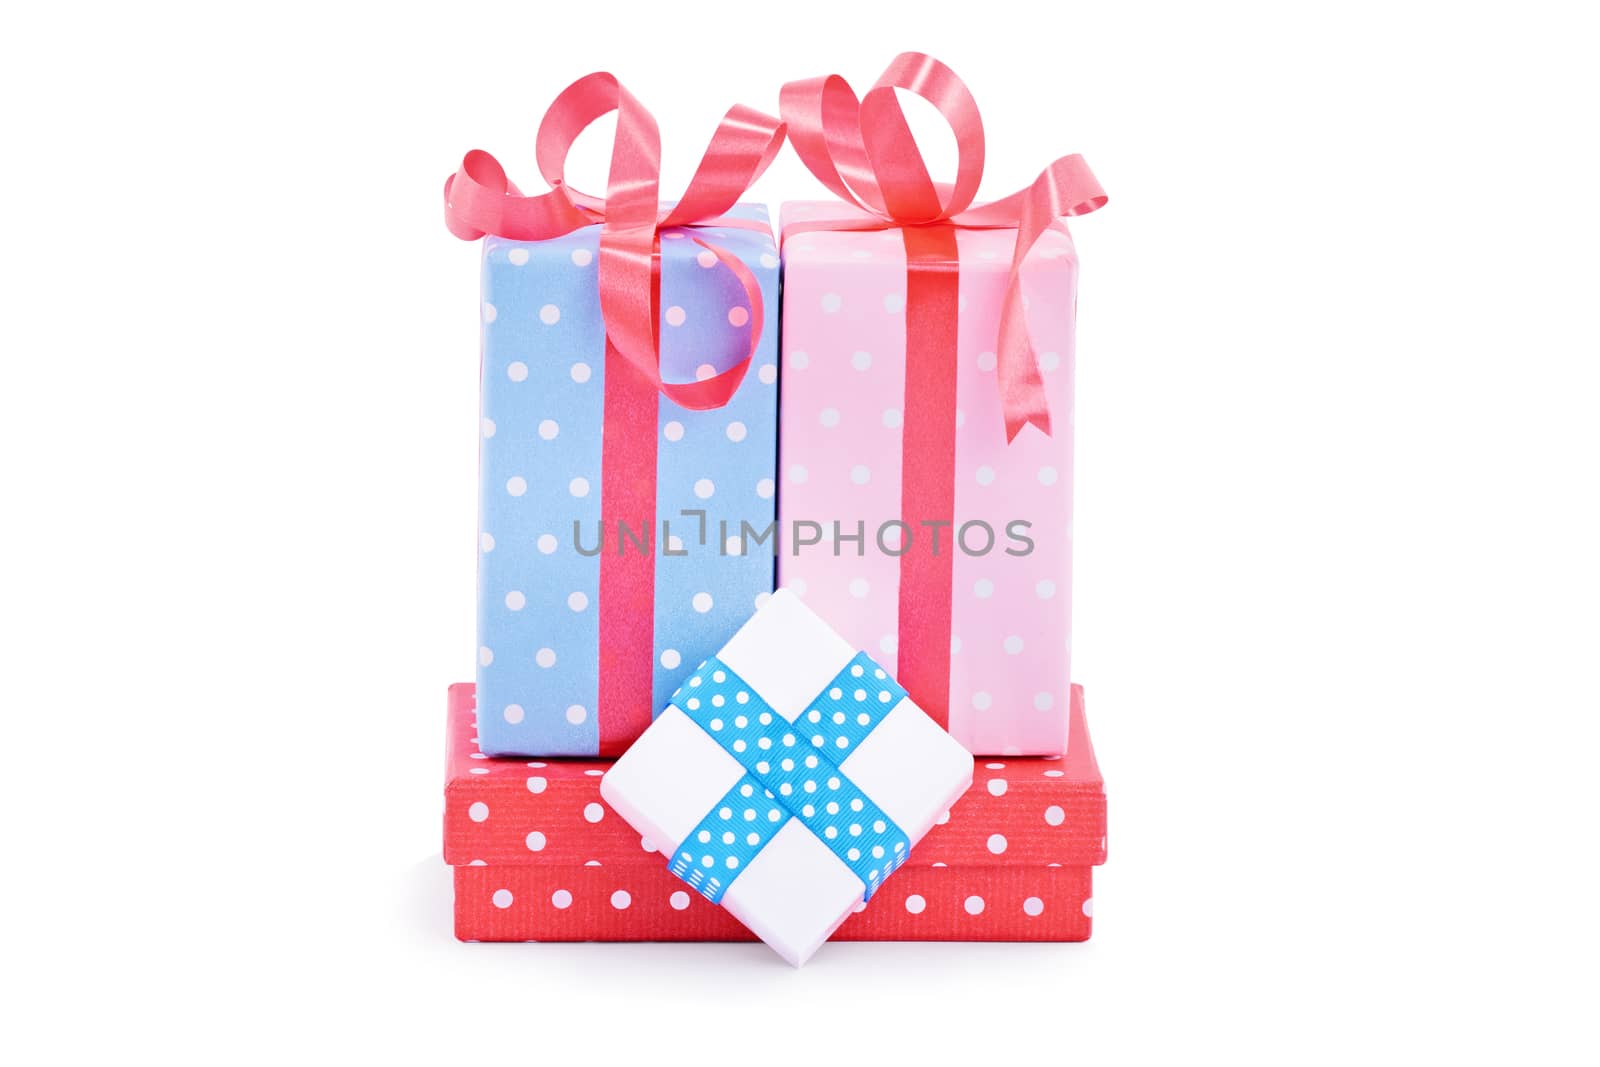 Pile of gifts, wrapped in cute wrapping paper and ribbons, isolated on white background. Christmas, New Year, anniversary, birthday, Valentine’s Day concept.